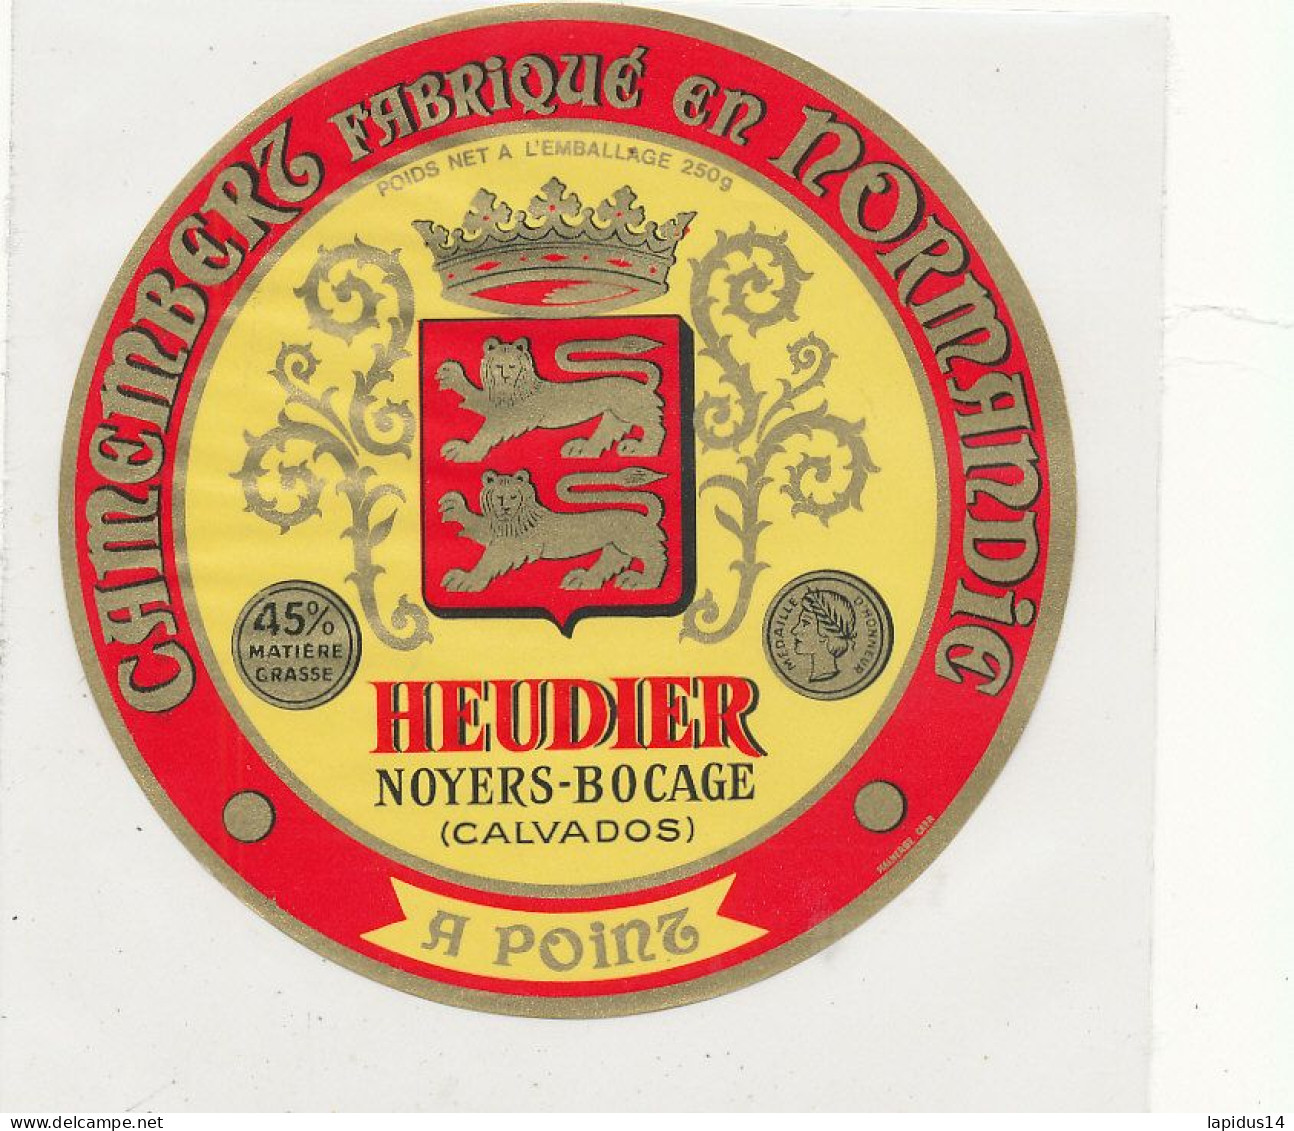 H 858 / ETIQUETTE CAMEMBERT    HEUDIER NOYERS BOCAGE  CALVADOS - Fromage